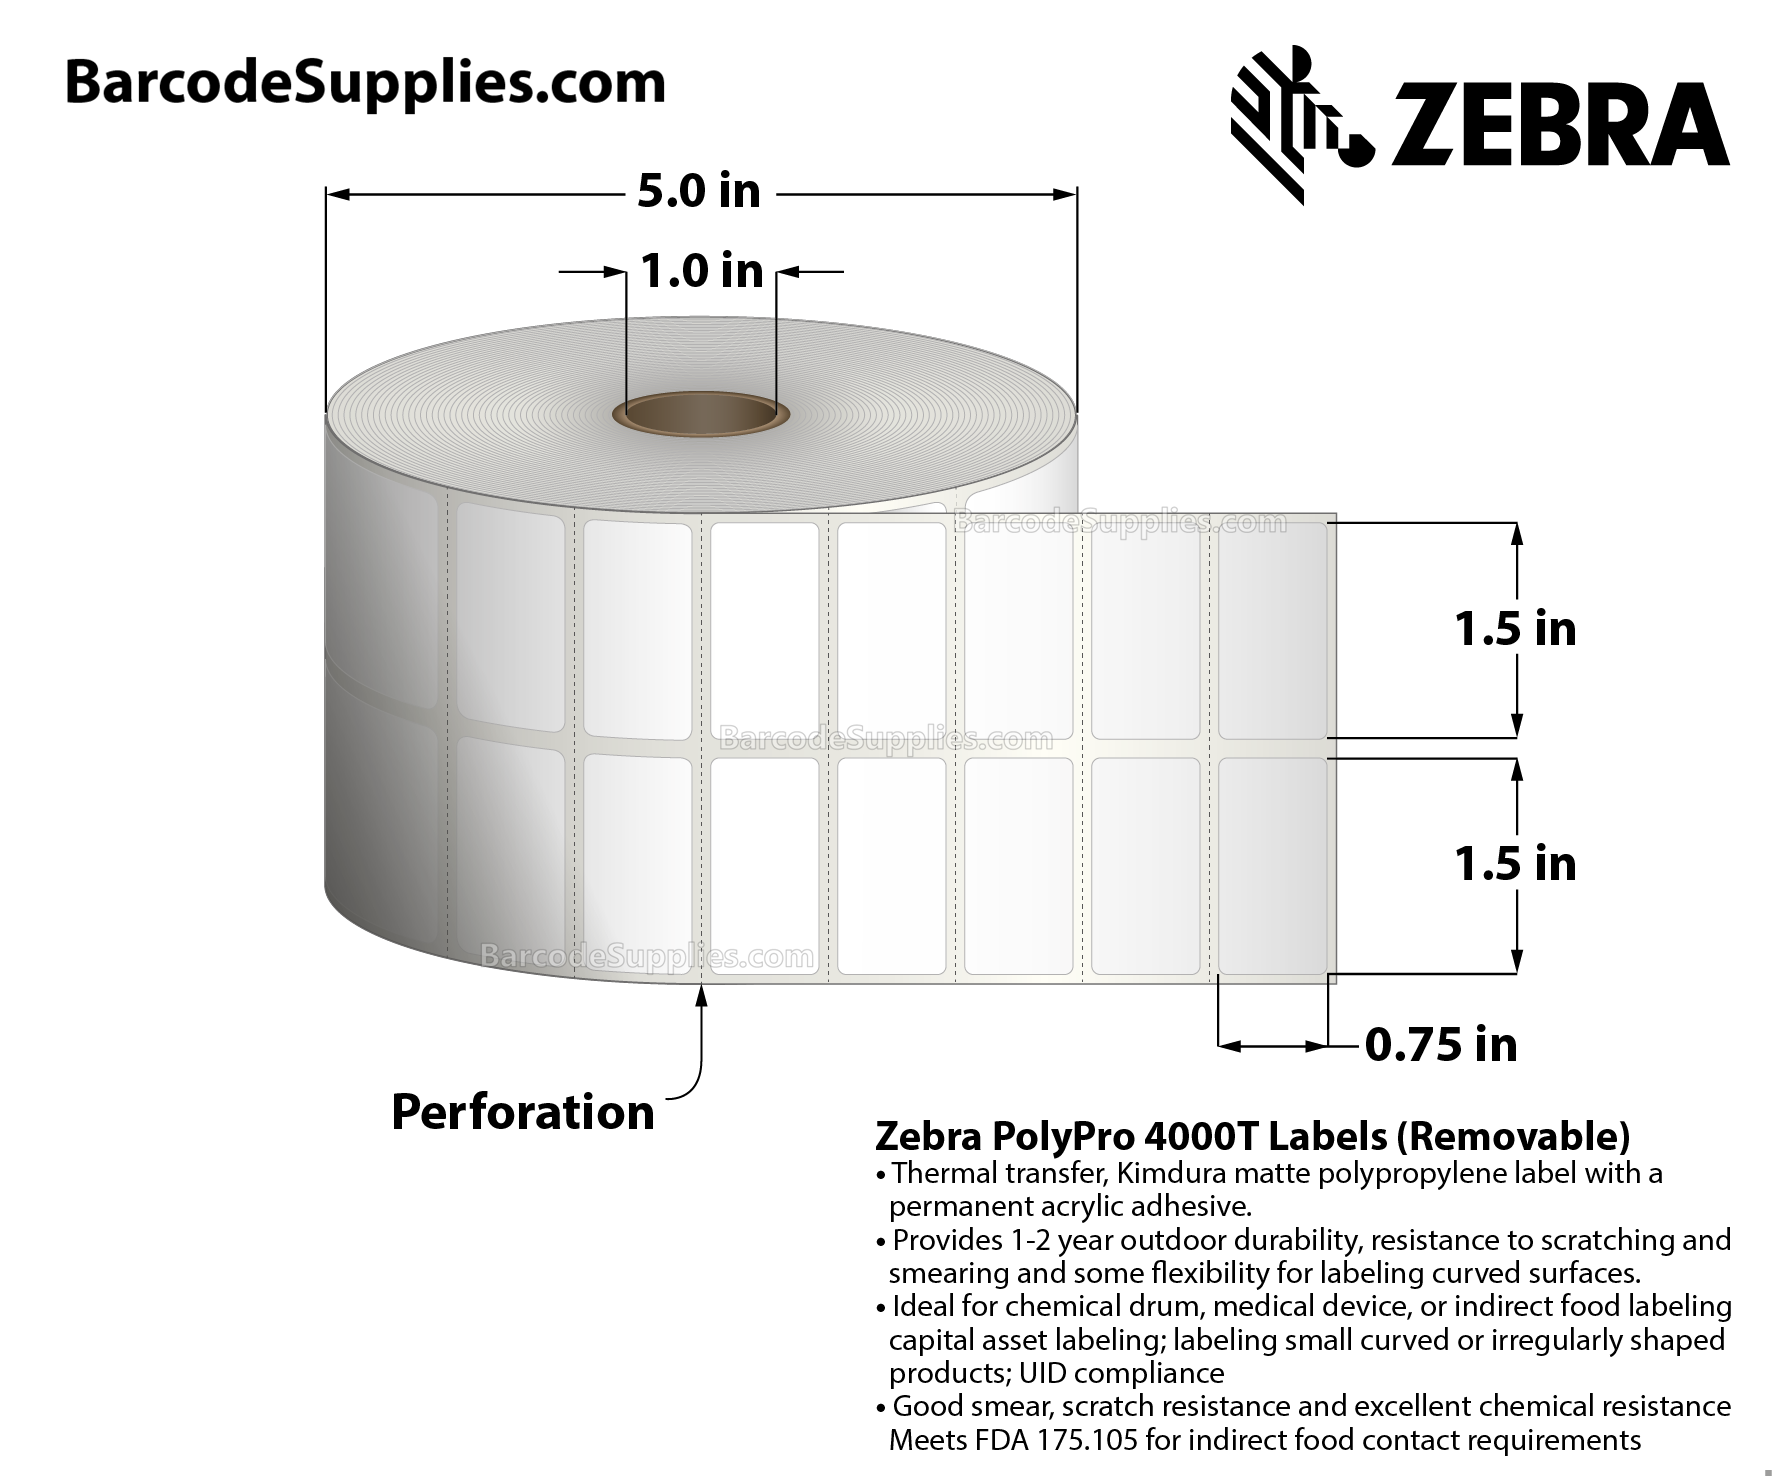 1.5 x 0.75 Thermal Transfer White PolyPro 4000T Removable (2-Across) Labels With Removable Adhesive - Perforated - 1500 Labels Per Roll - Carton Of 1 Rolls - 1500 Labels Total - MPN: 10022933